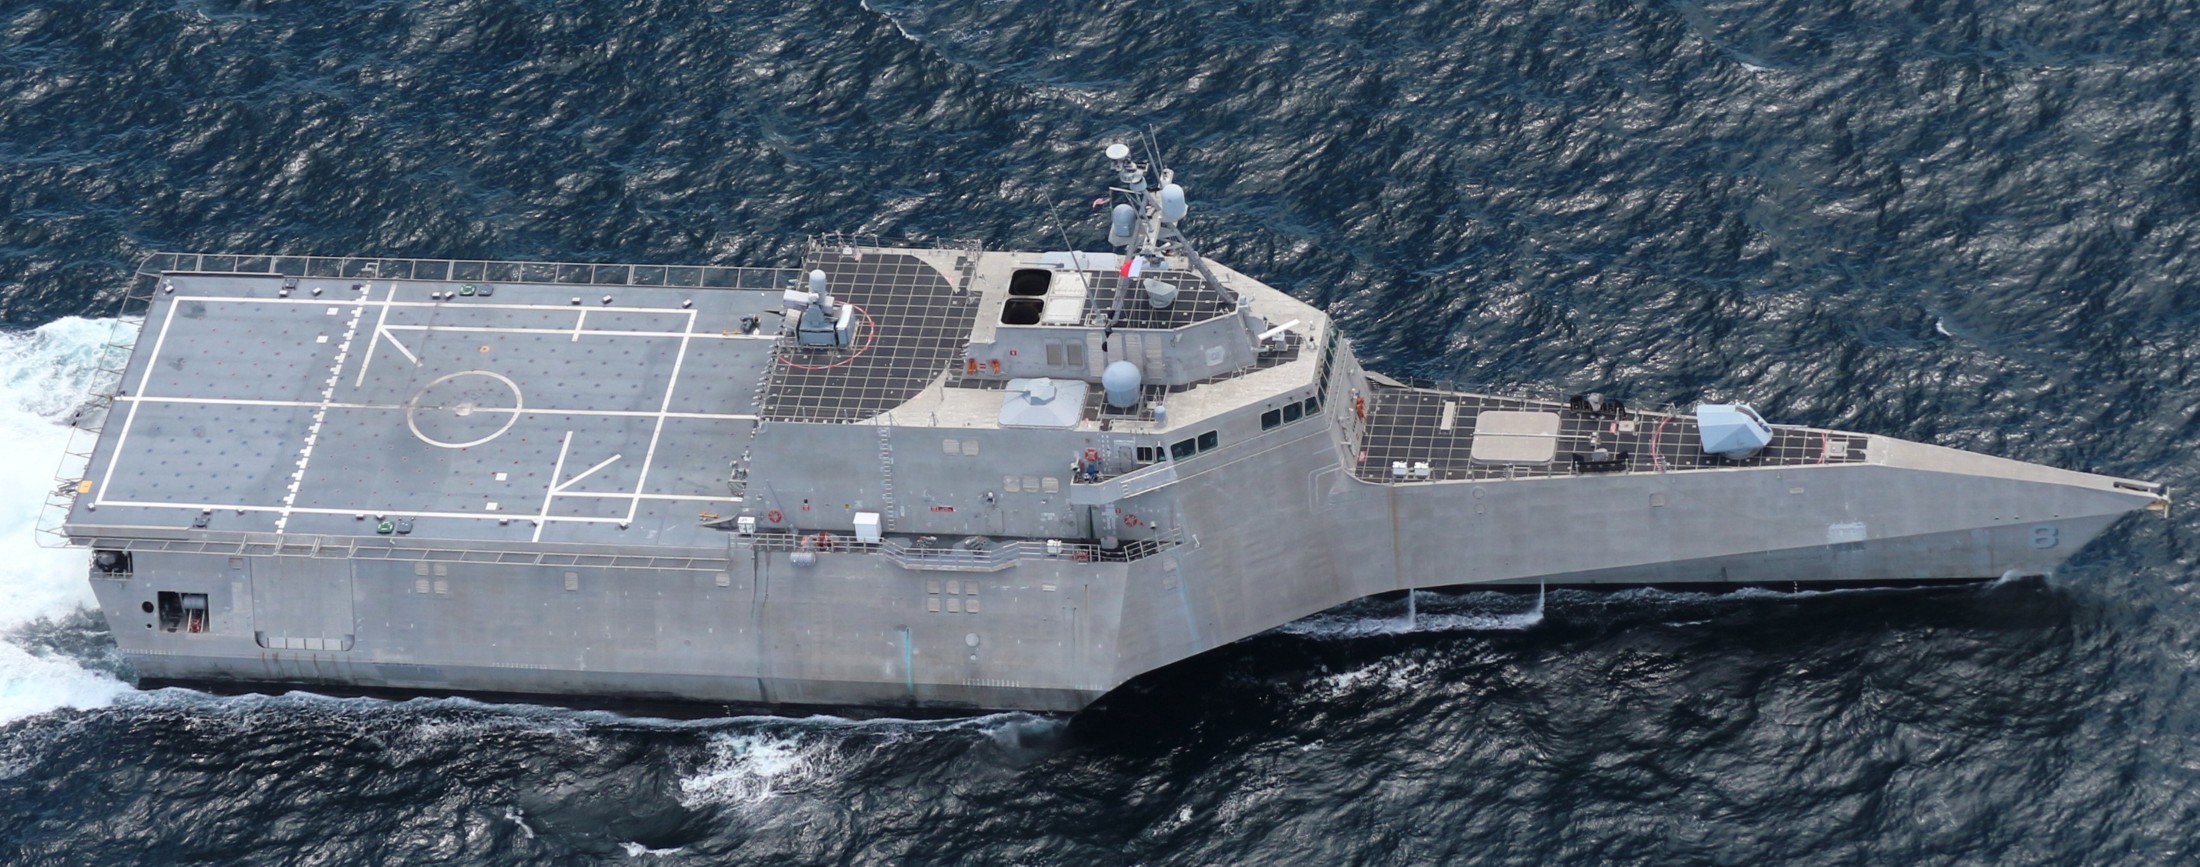 lcs-8 uss montgomery independence class littoral combat ship us navy 30 carat exercise